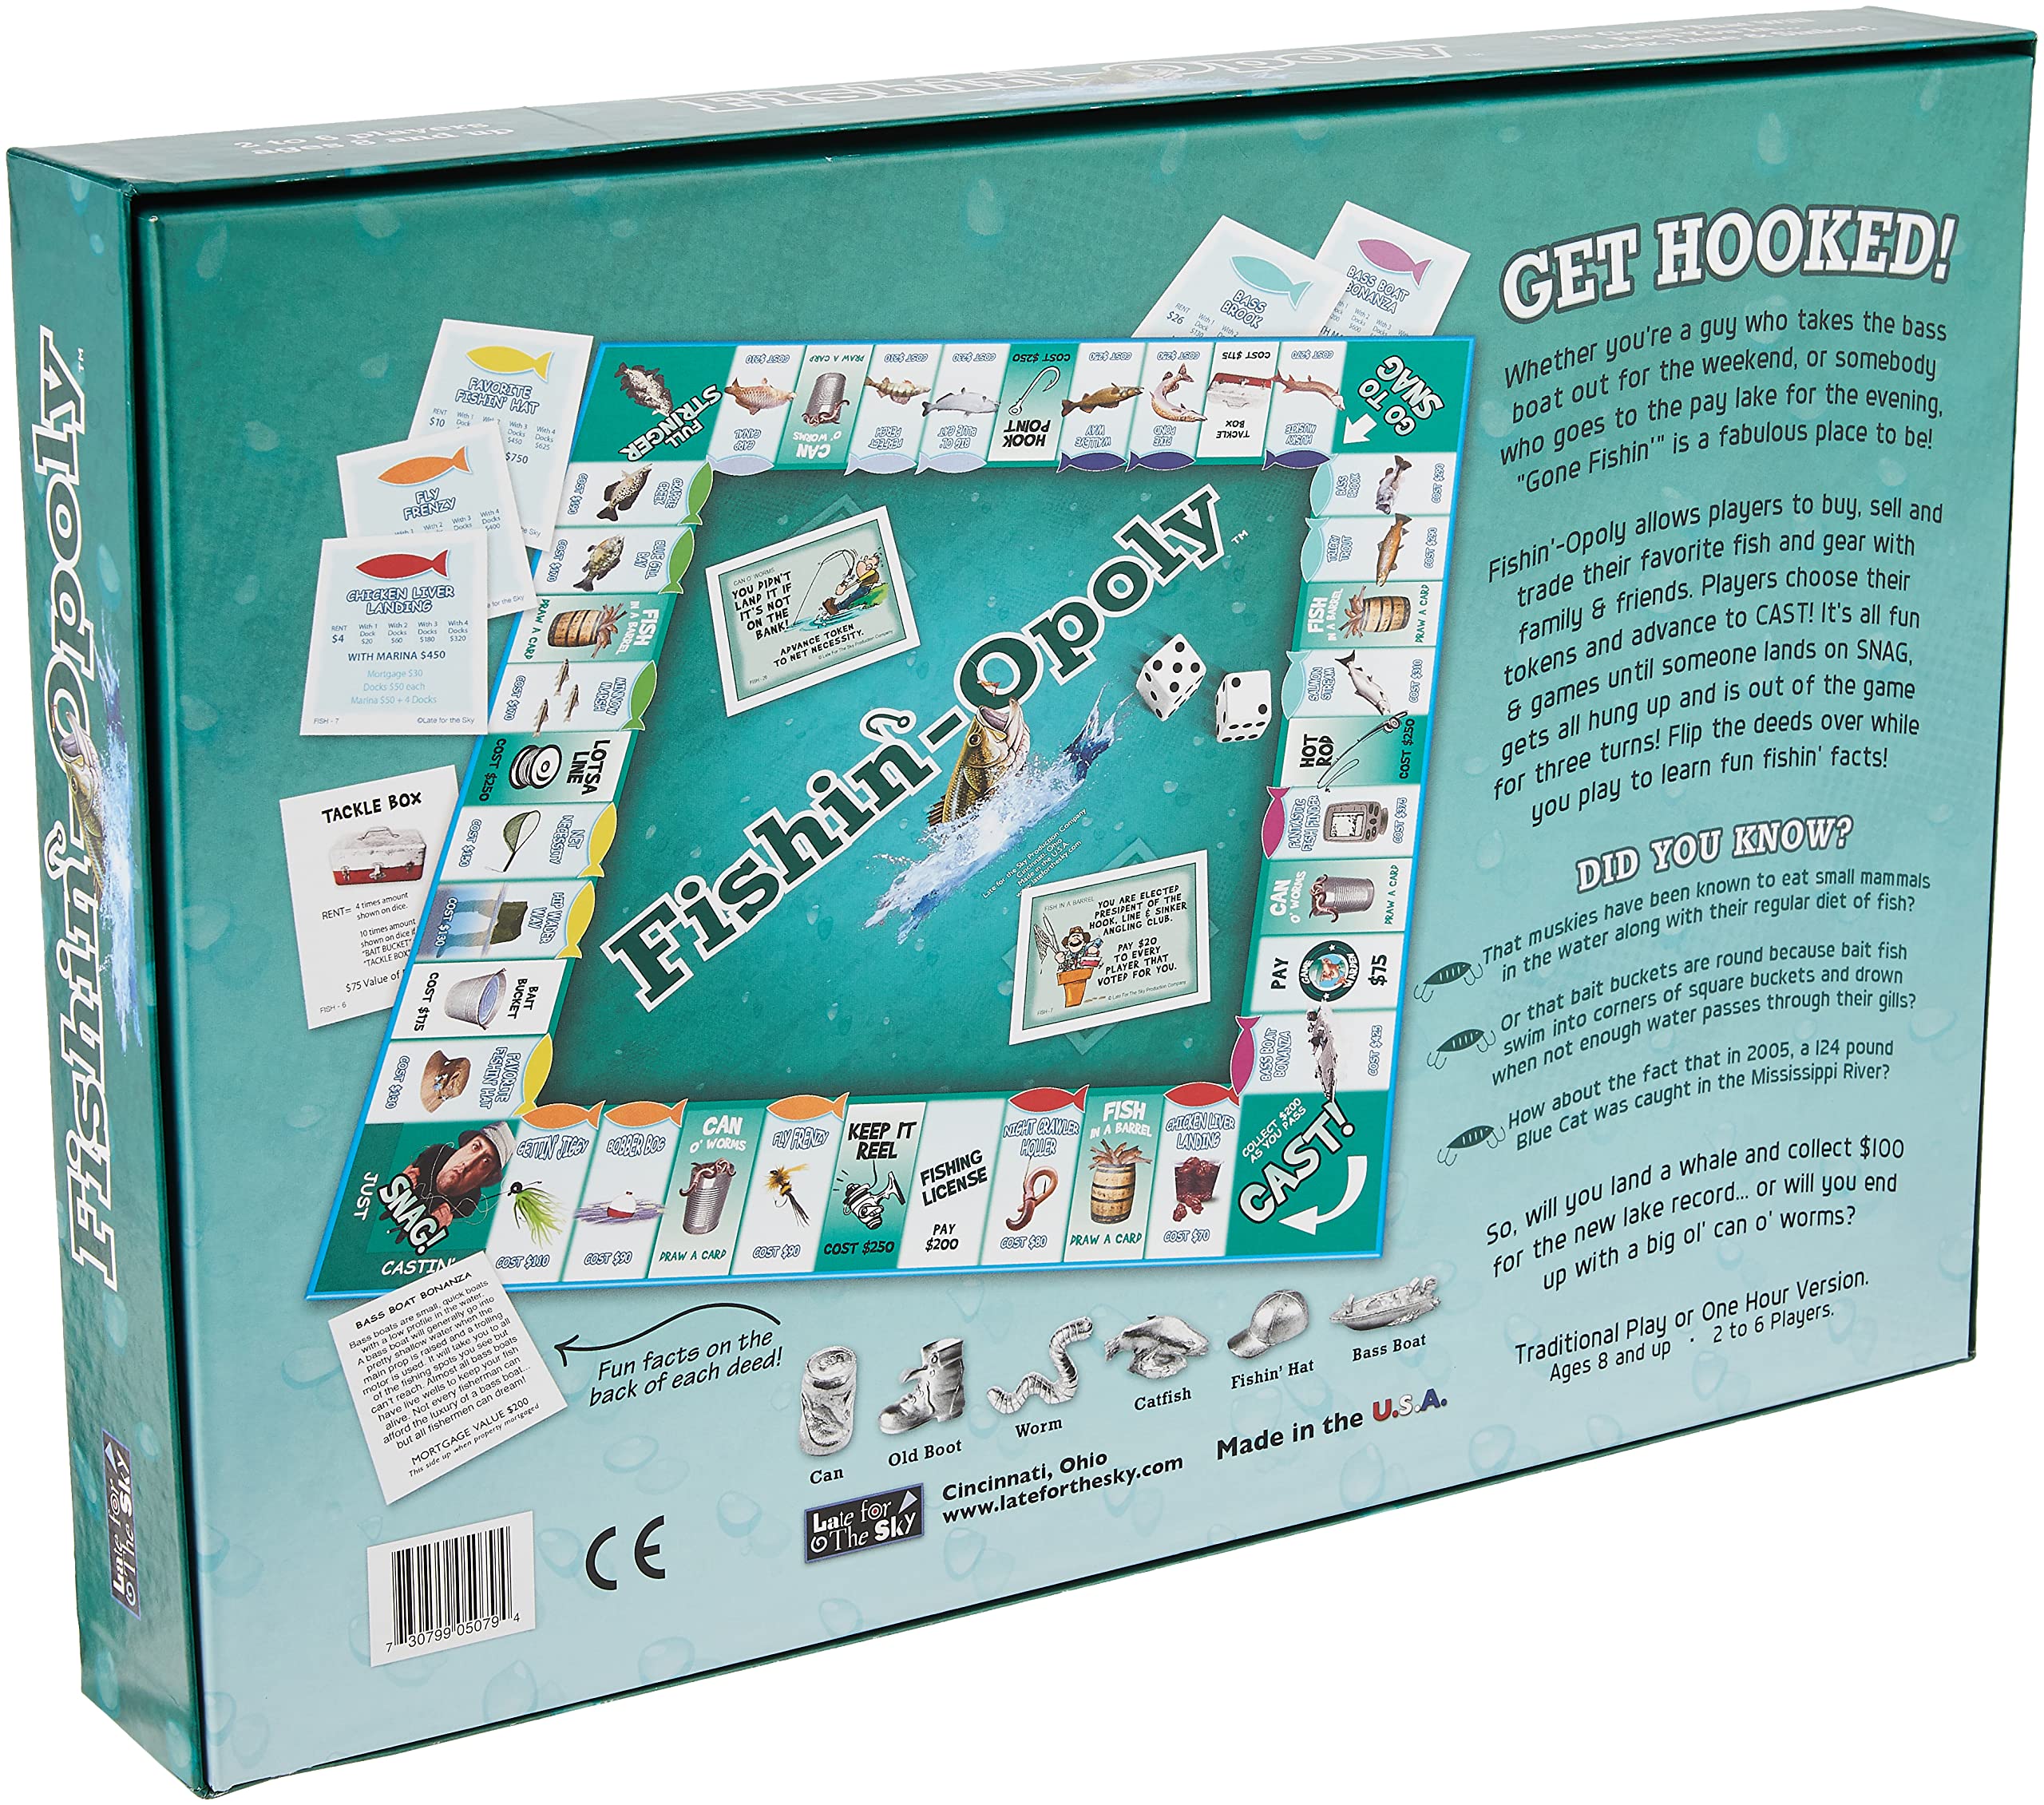 Late for the SkyFishin'-Opoly